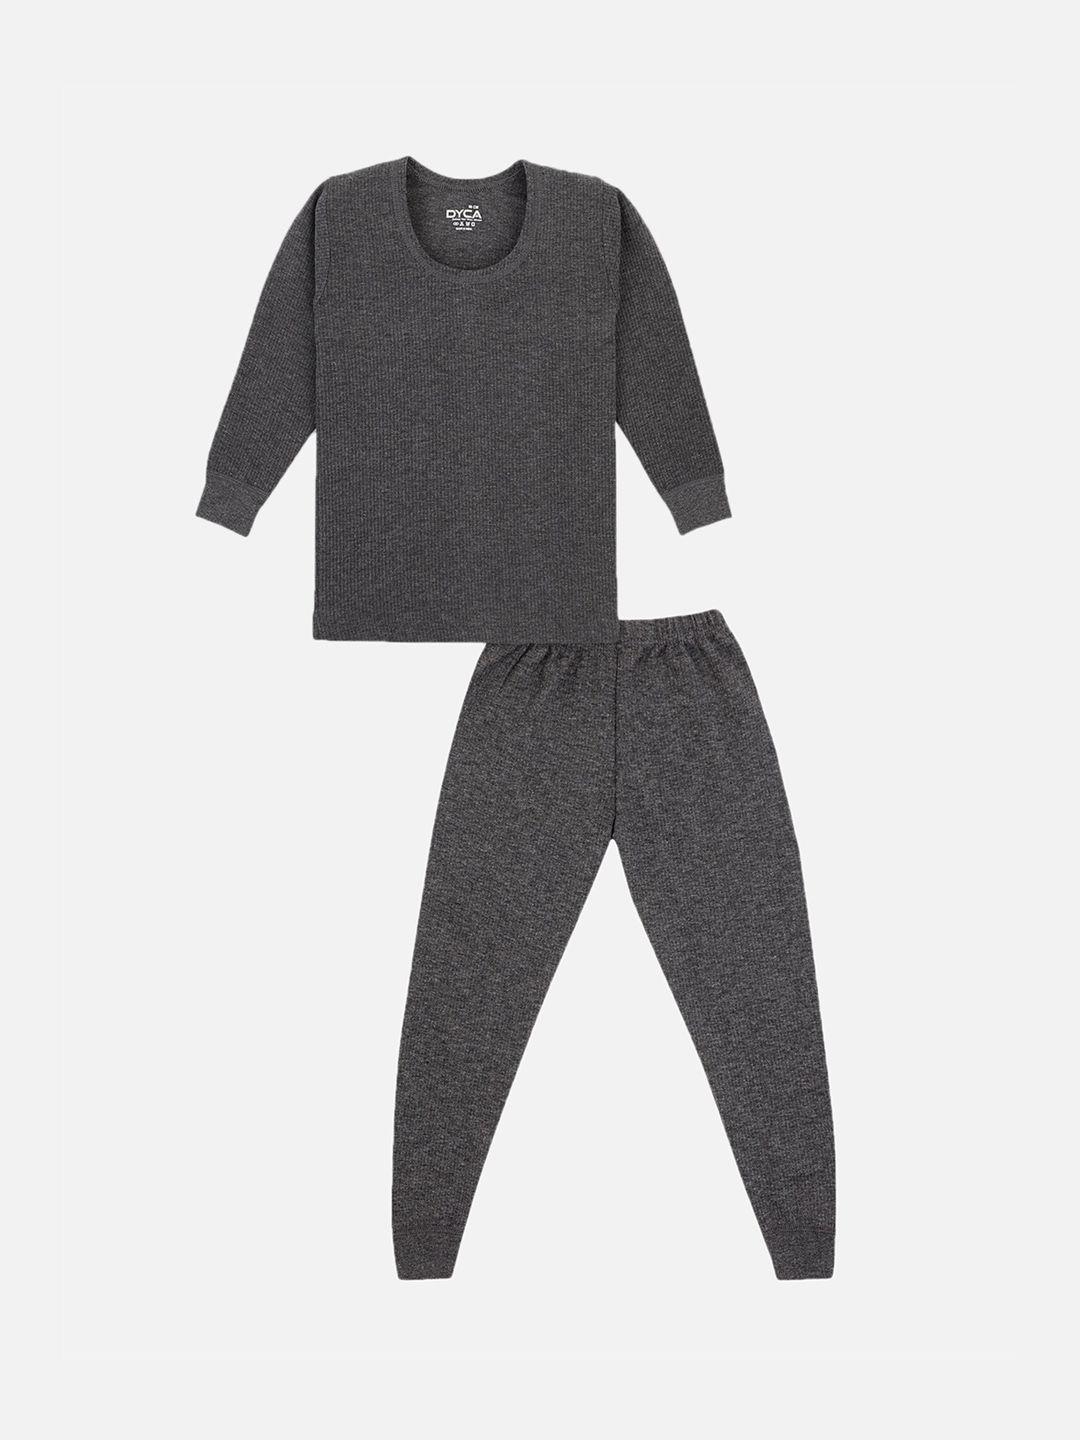 dyca kids charcoal grey solid thermal set